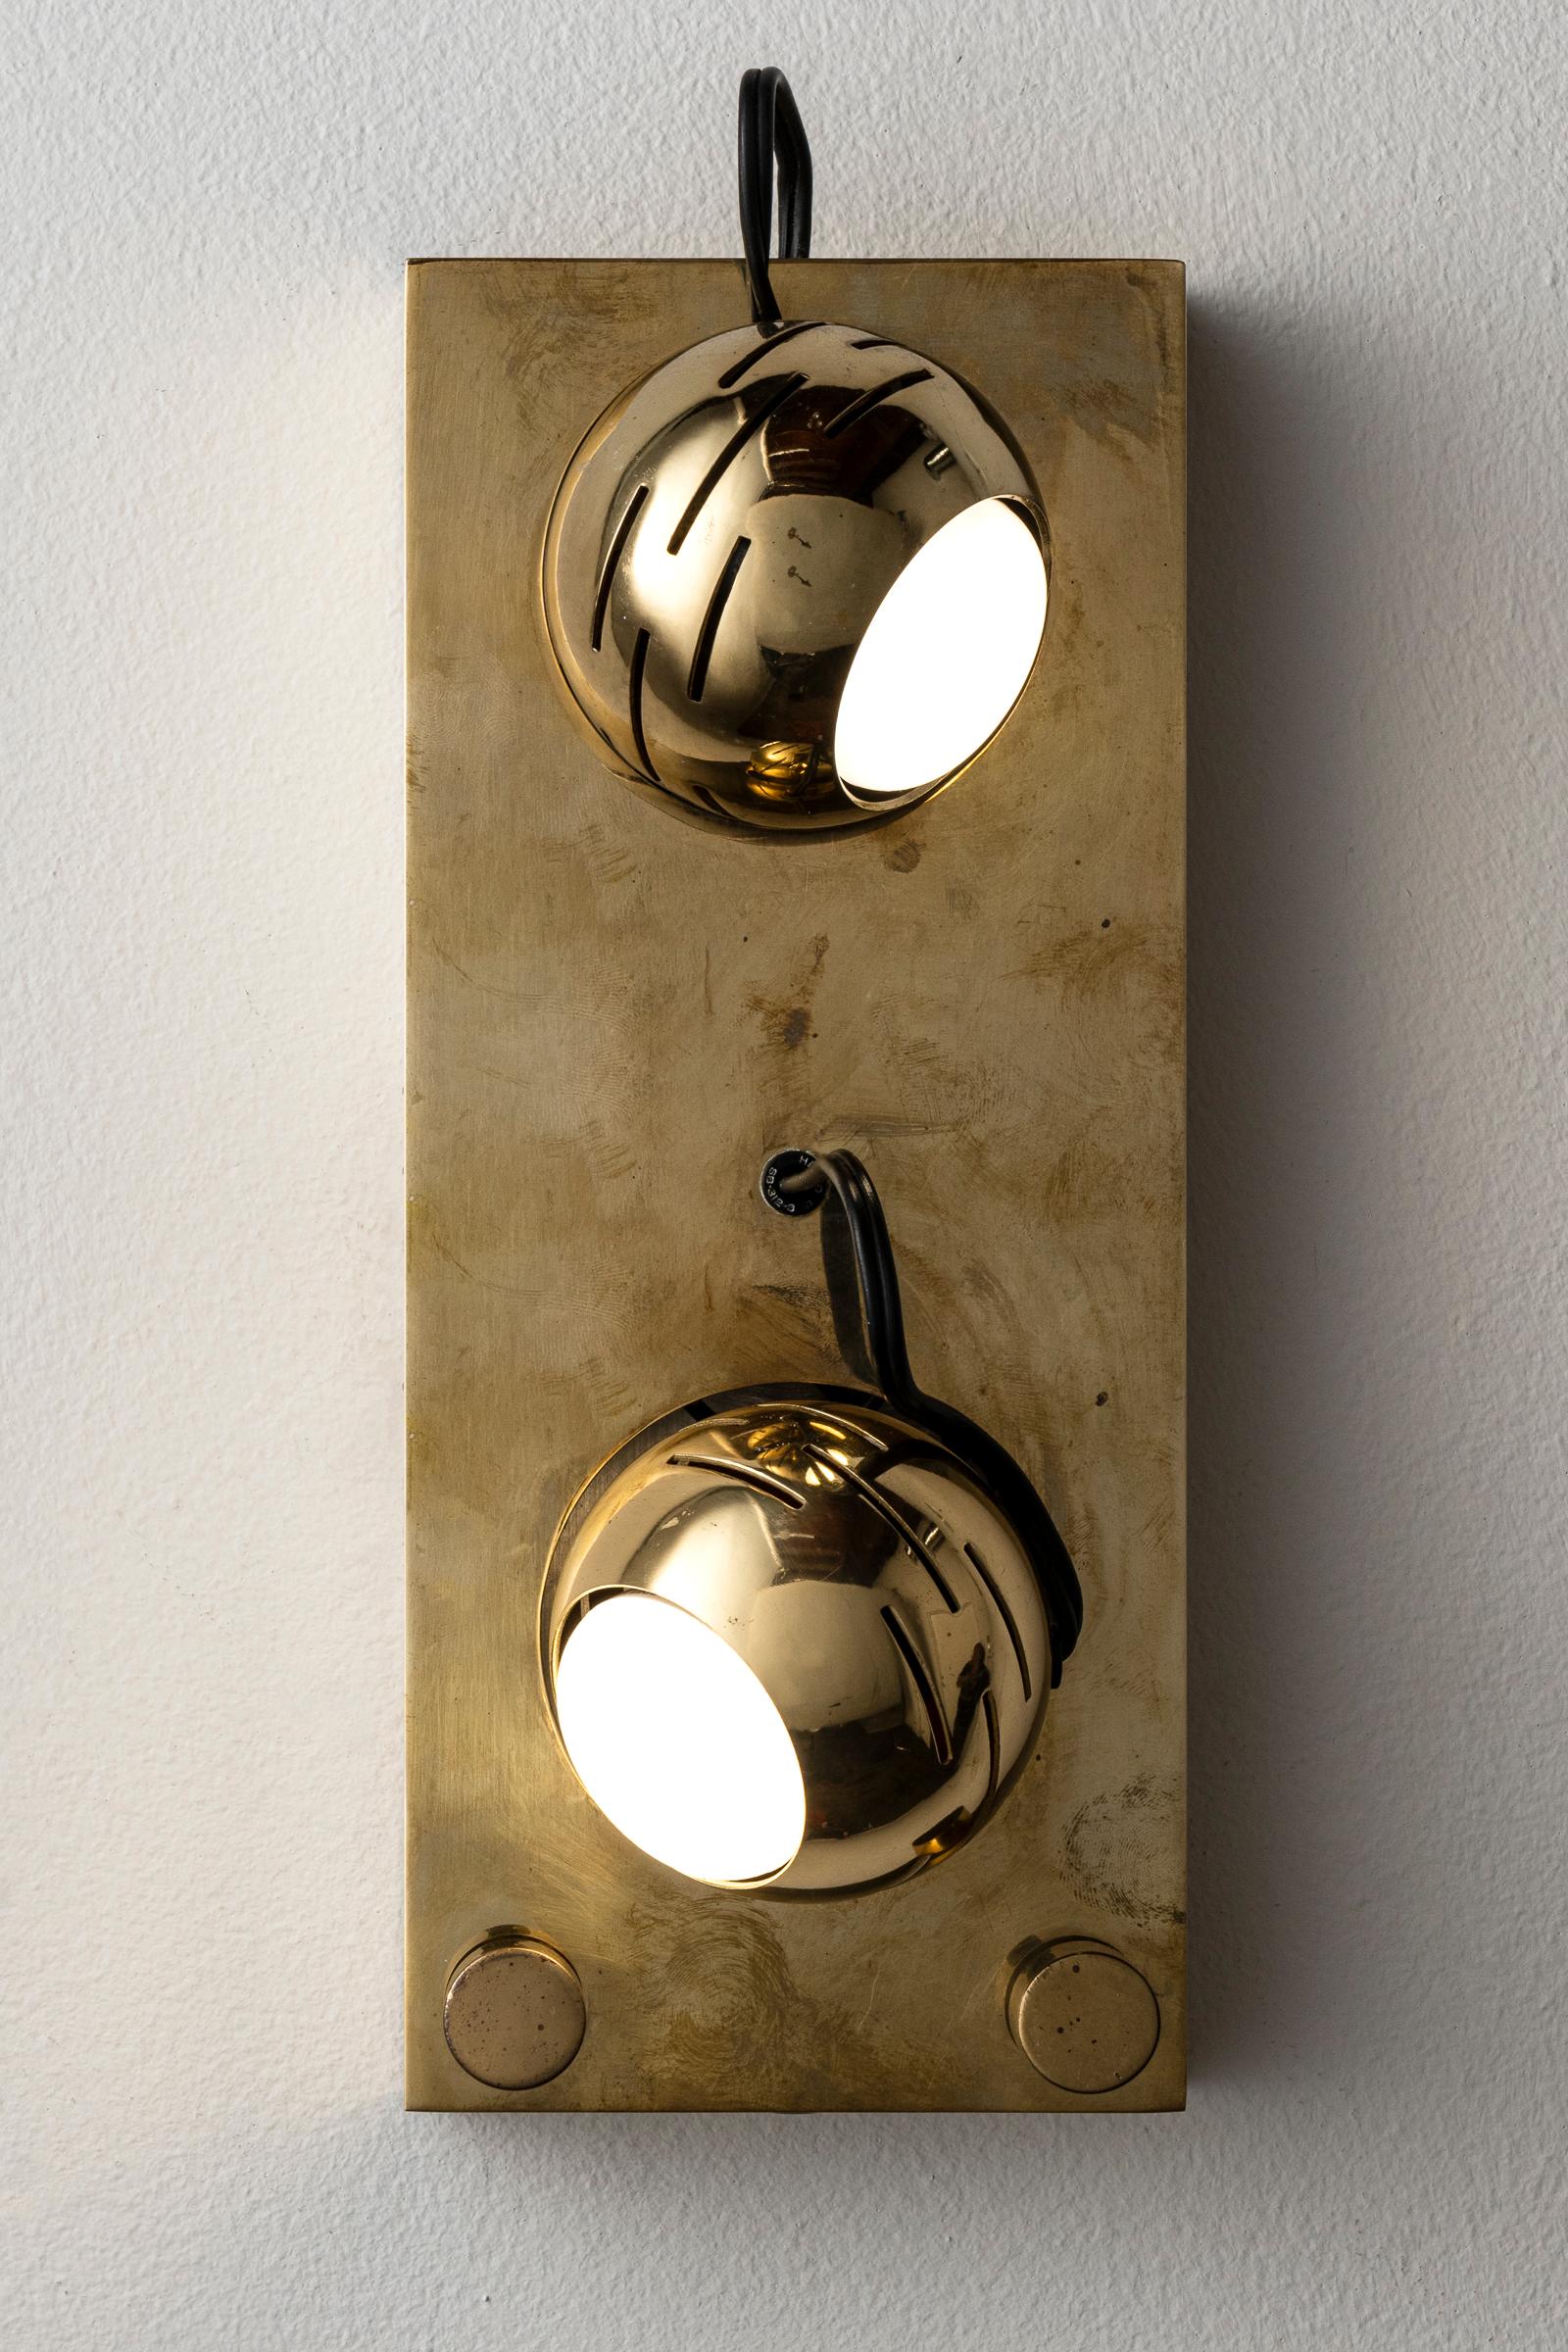 Eyeball Wall lamp by Angelo Lelli for Arredoluce. Designed and manufactured in Italy, circa 1960's. Brass. Rewired for U.S. standards. Globes adjust to various positions. We recommend two E27 6ow maximum bulbs. Bulbs not included. Please note, we